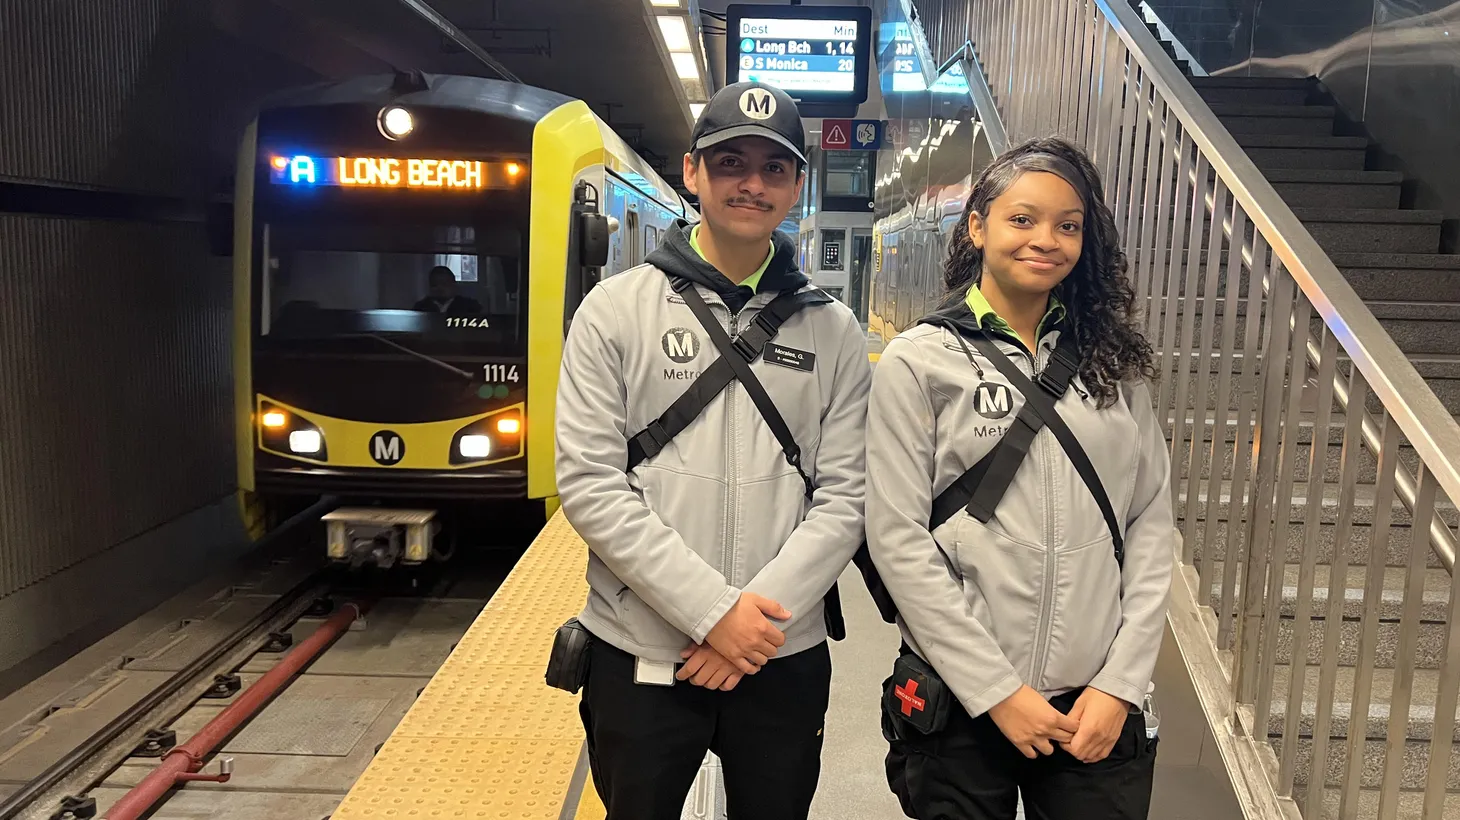 Metro Ambassadors Gilberto Morales and Aryna Moore are photographed at the Bunker Hill light rail station.